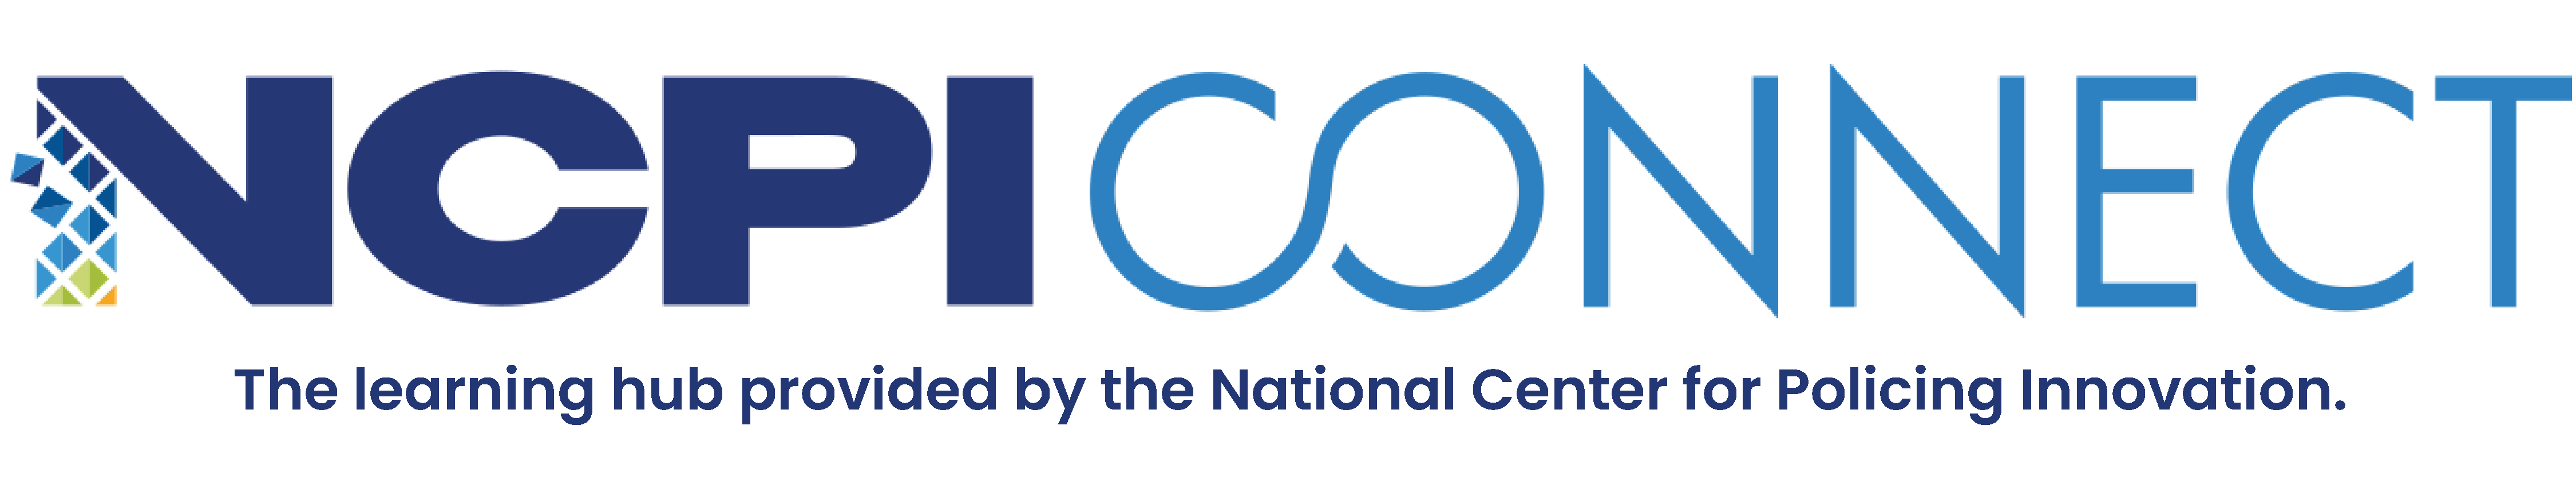 NCPI Connect: The learning hub provided by the National Center for Policing Innovation.